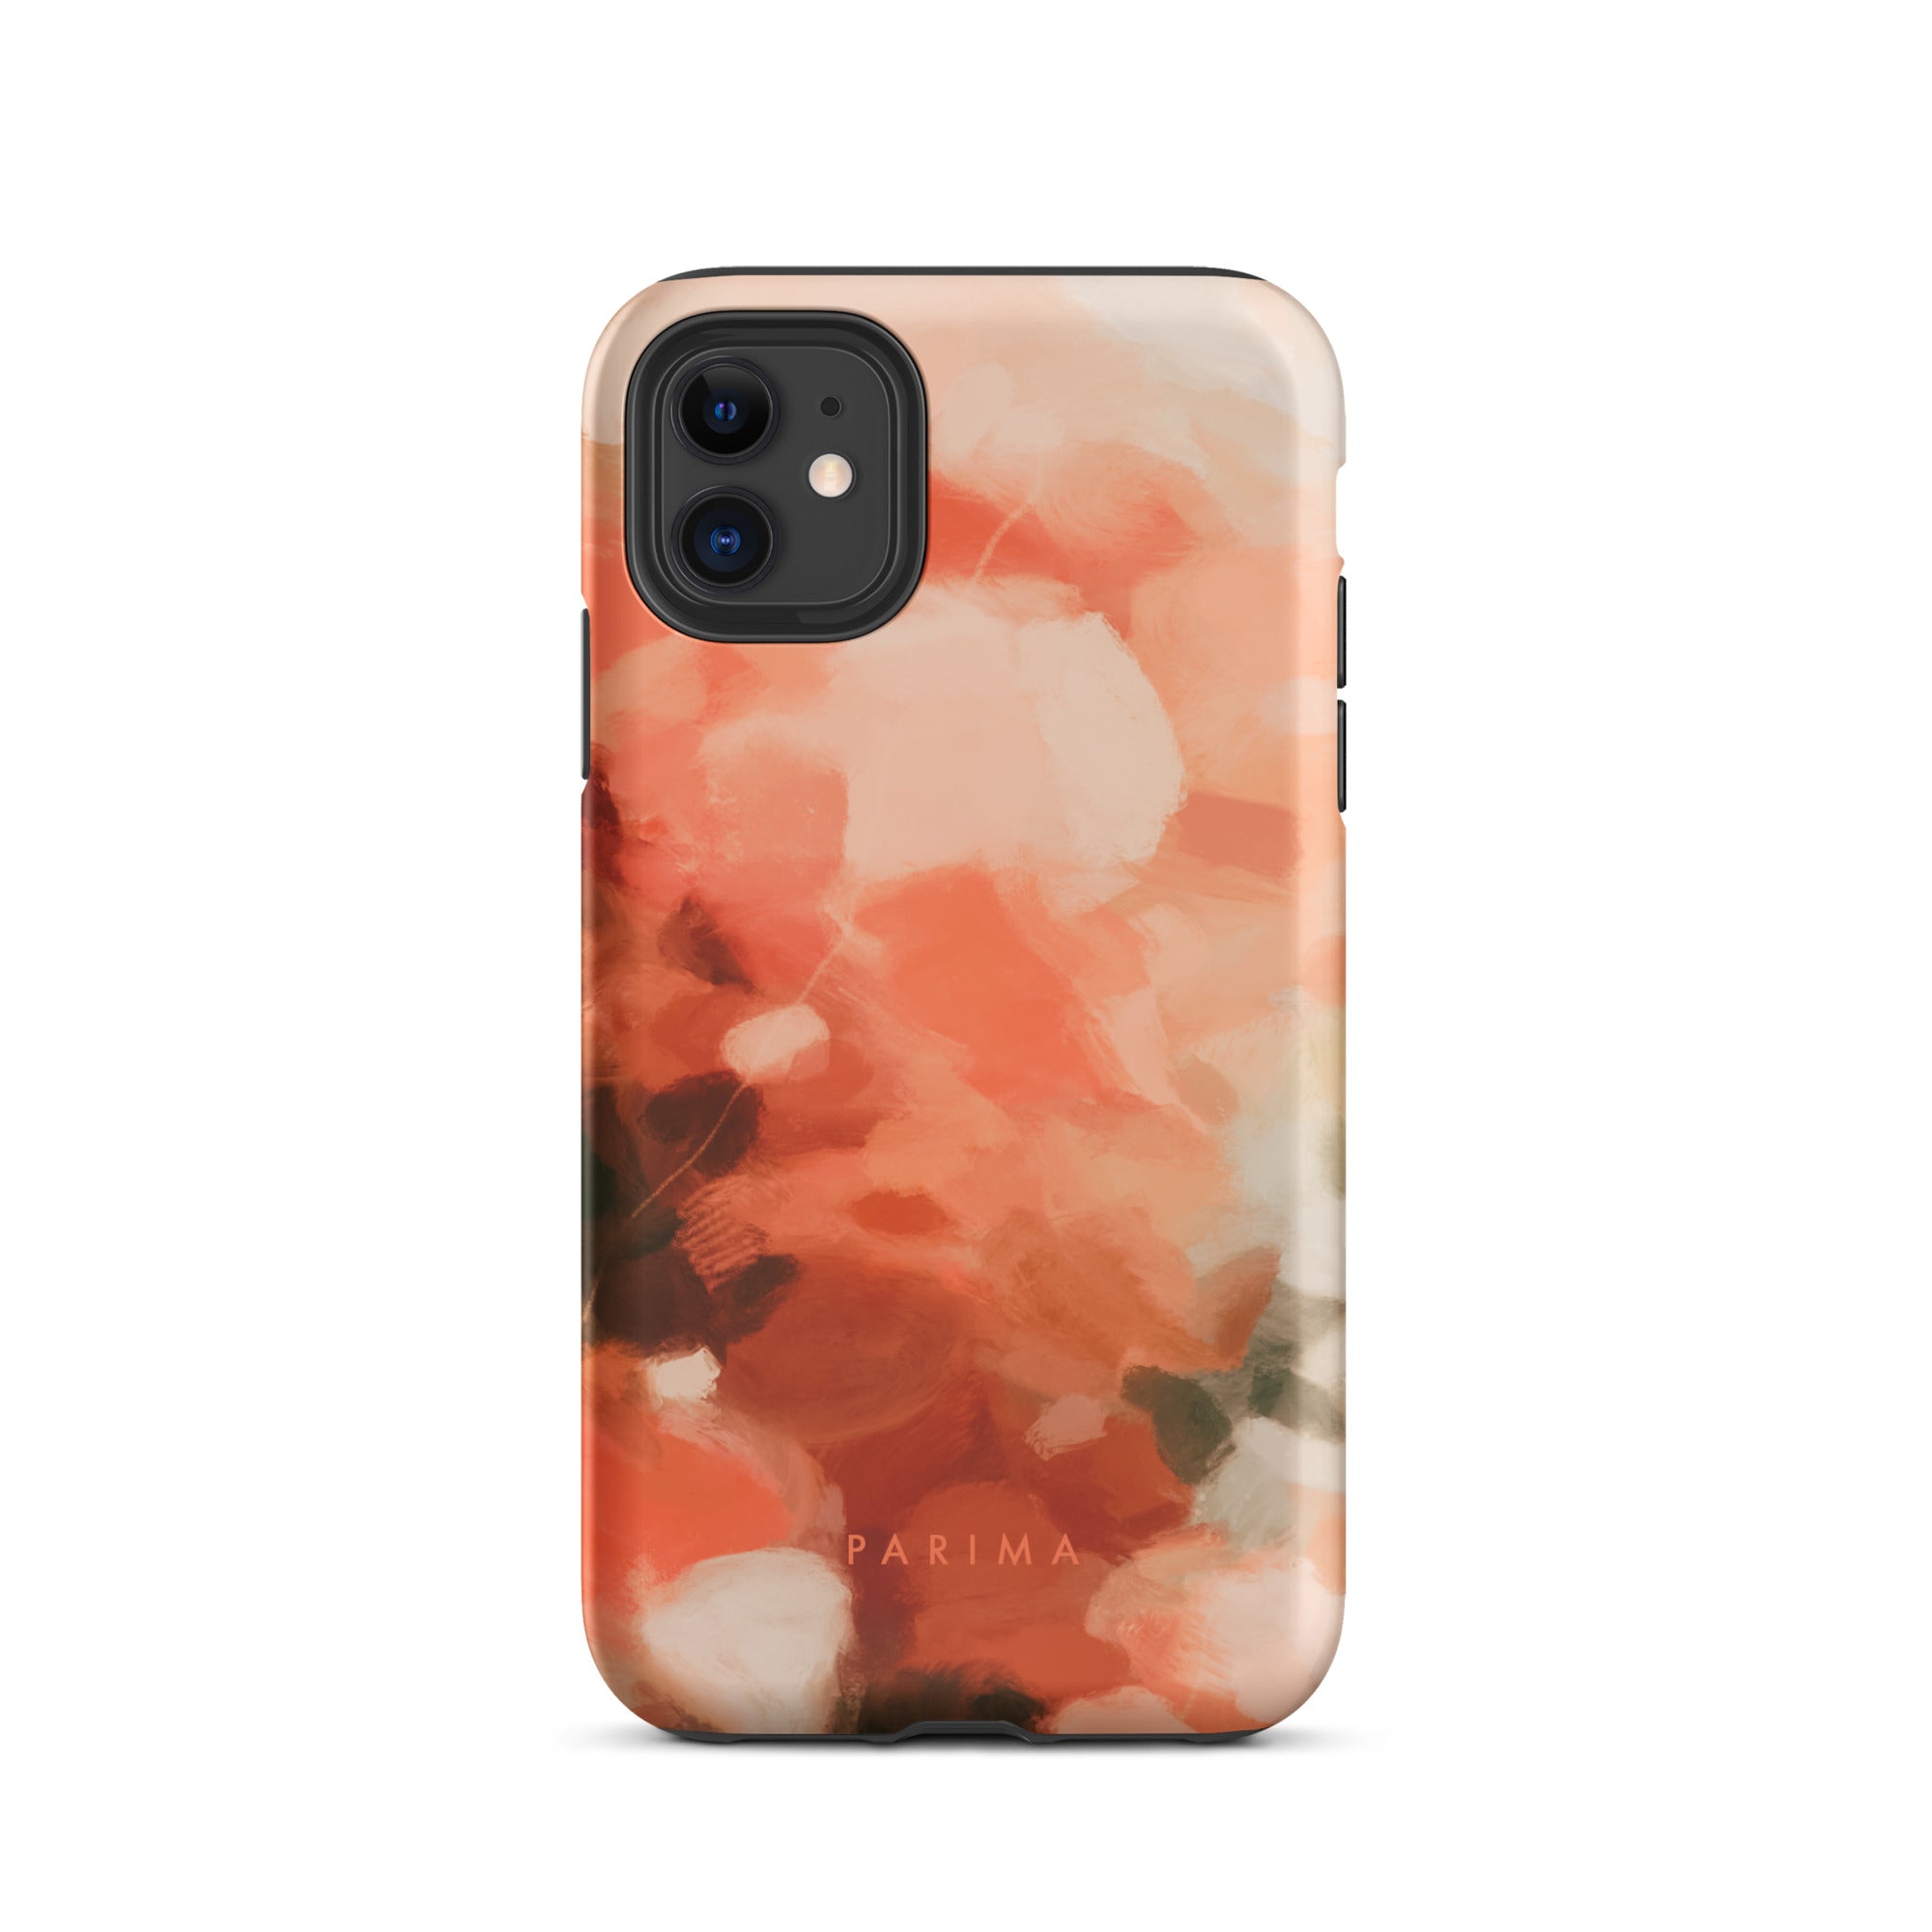 Sweet Nectar, orange and pink abstract art - iPhone 11 tough case by Parima Studio